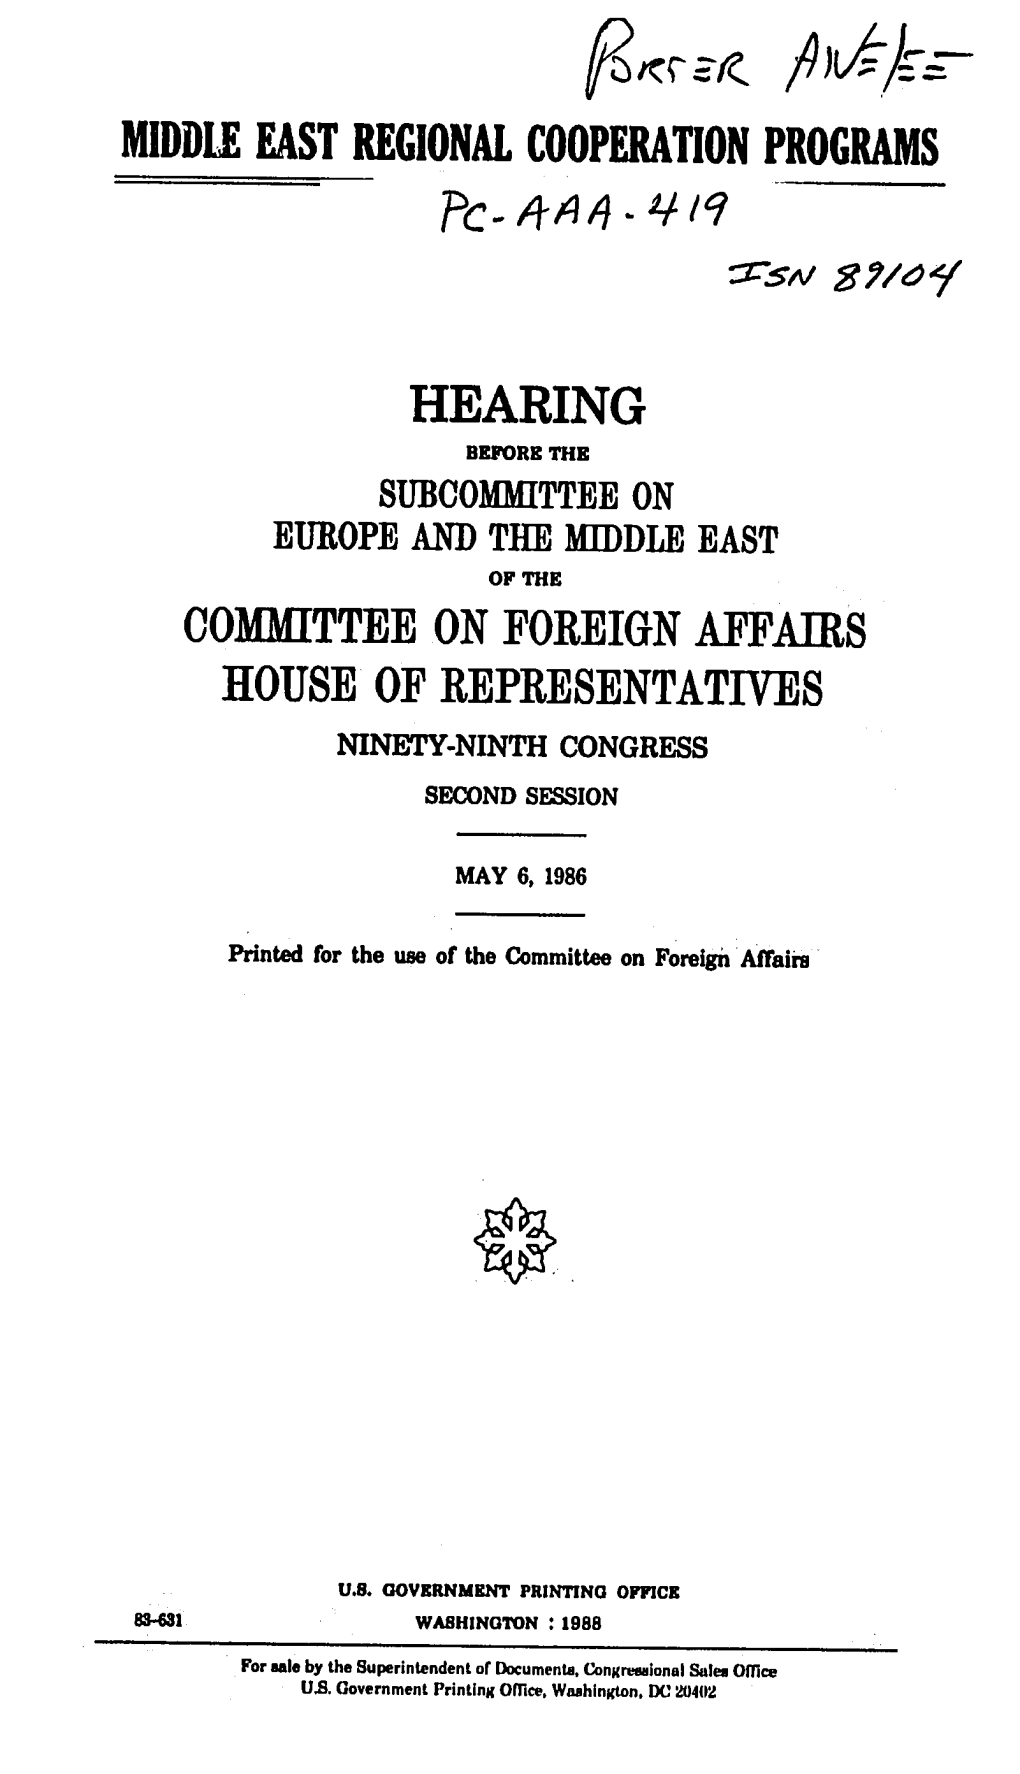 Middie East Regional Cooperation Programs Hearing Committee on Foreign Affairs House of Representatives